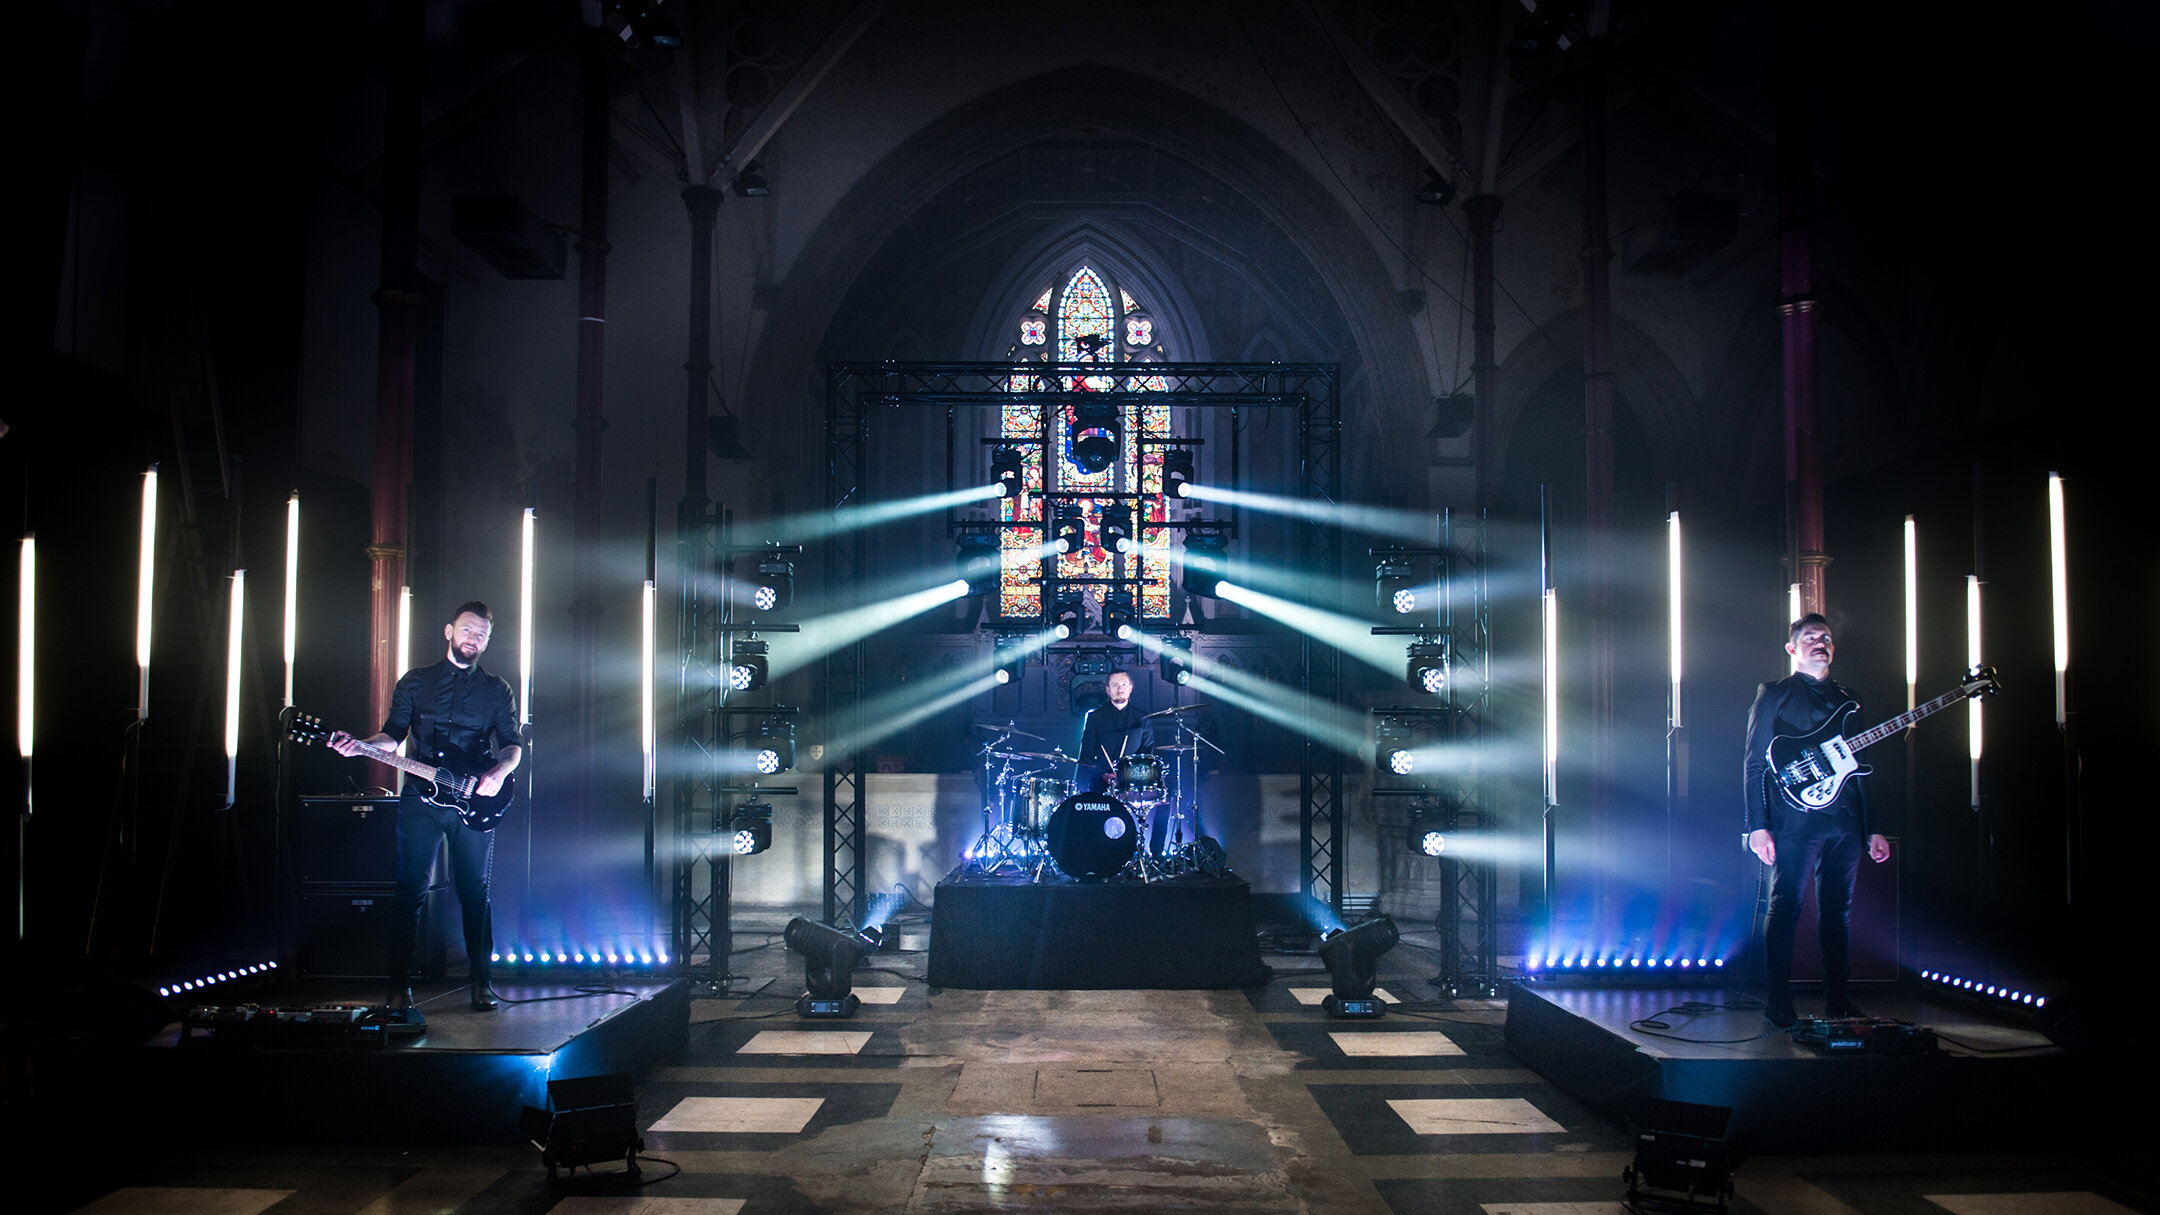 reveries-events-spire-we-are-polymath-video-shoot-music-lights-lighting-staging-truss-production-robe-avolites-o.jpg